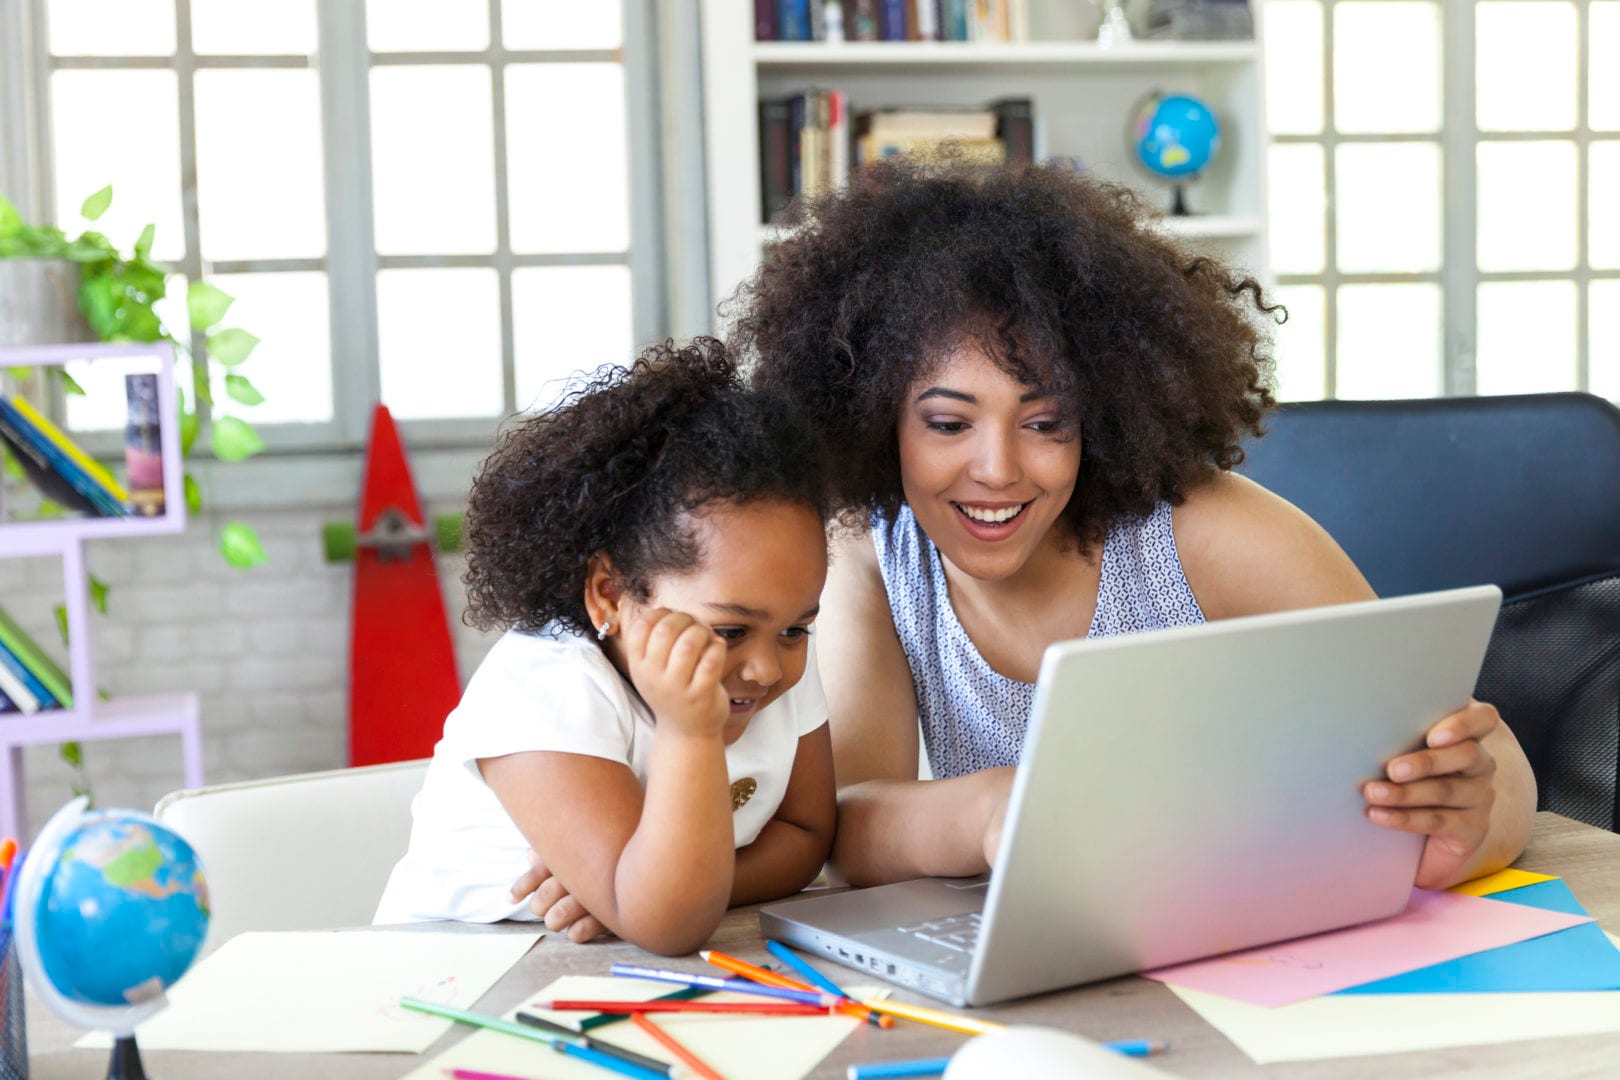 What nannies or sitters need to know to assist kids with distance learning